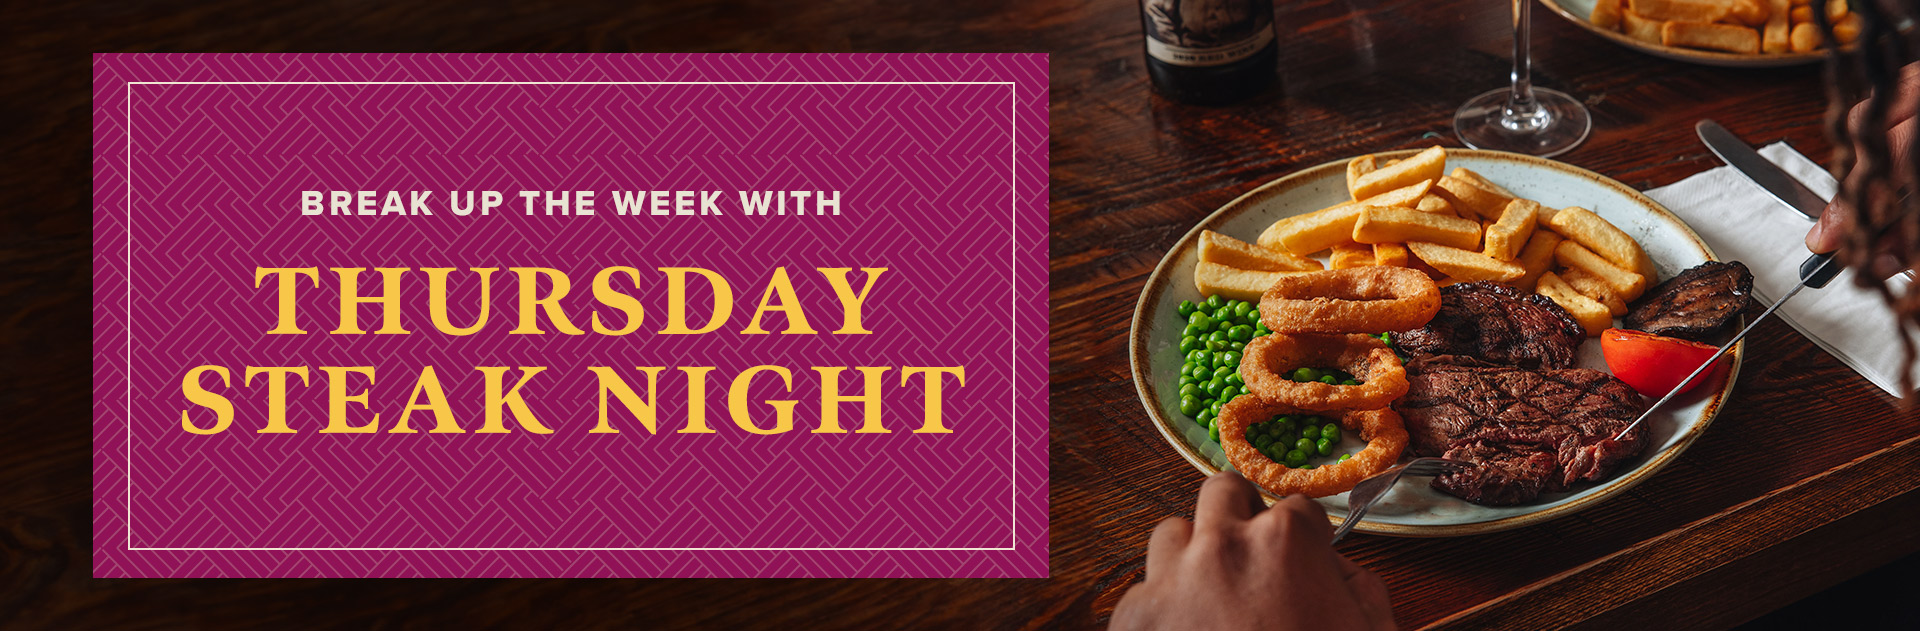 Thursday Steak Night at The Duck in the Pond